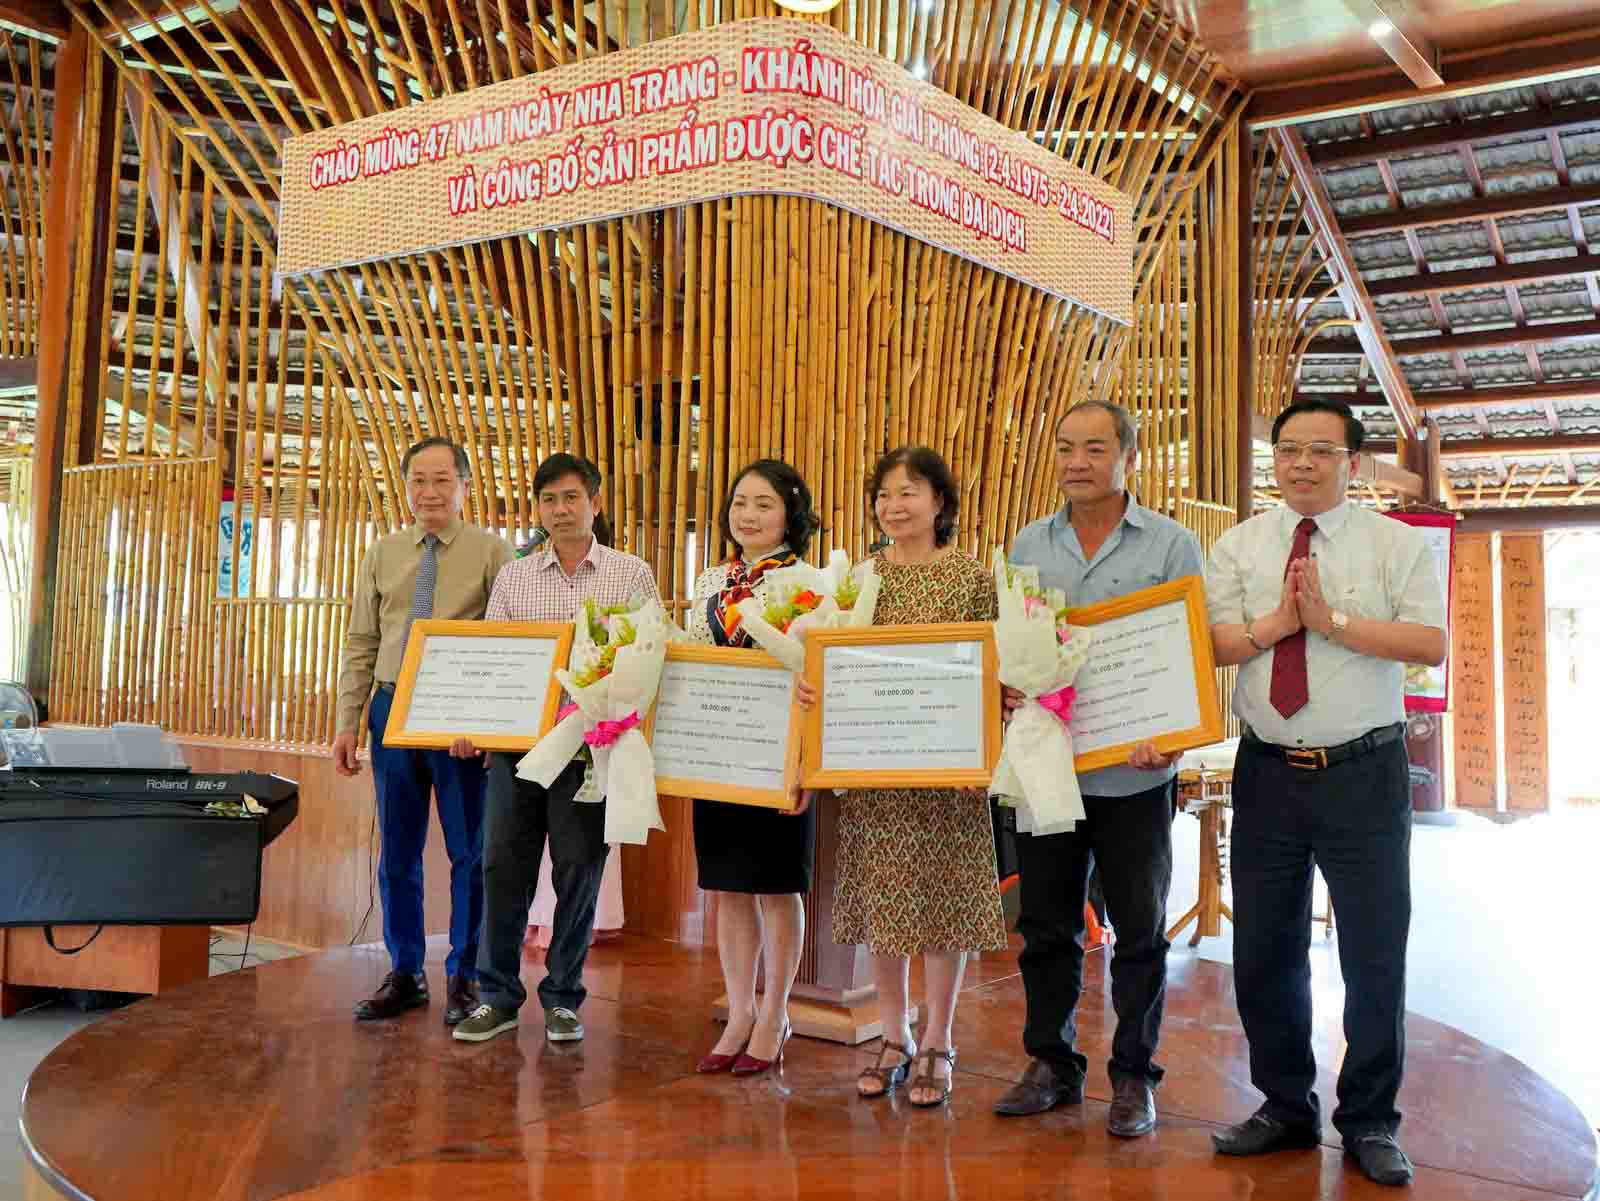 Leaderships of Nha Trang City and Khanh Hoa Provincial Association of Science and Technology giving financial support of Truong Son Craft Village to representatives of units